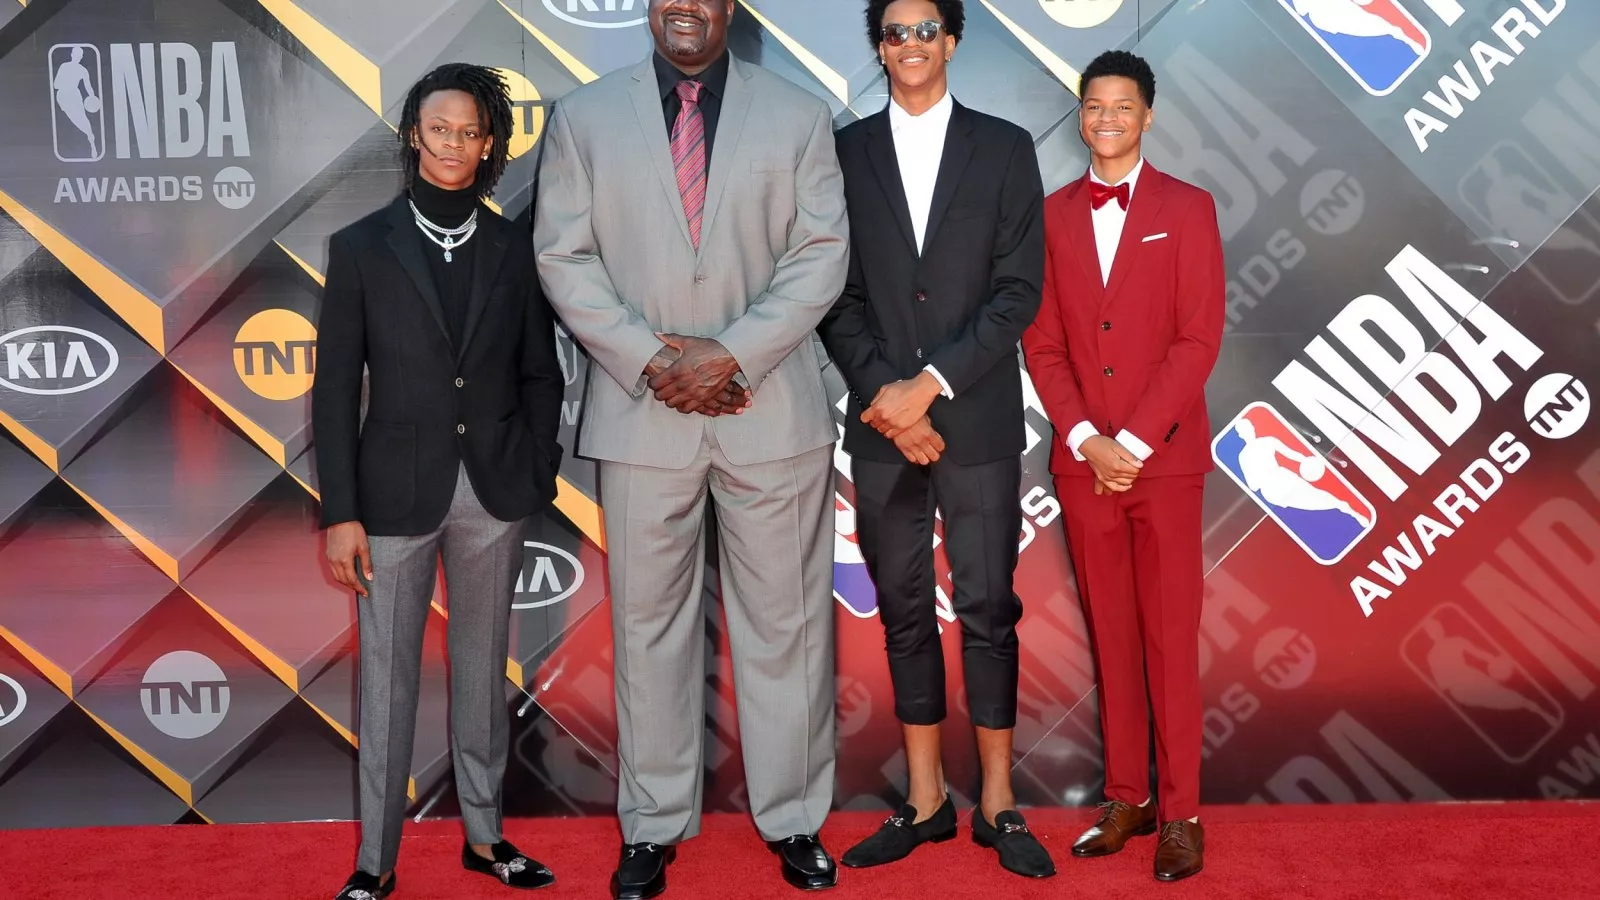 Having Survived Heart Surgery, Shaquille O'Neal's son 'Dreadfully